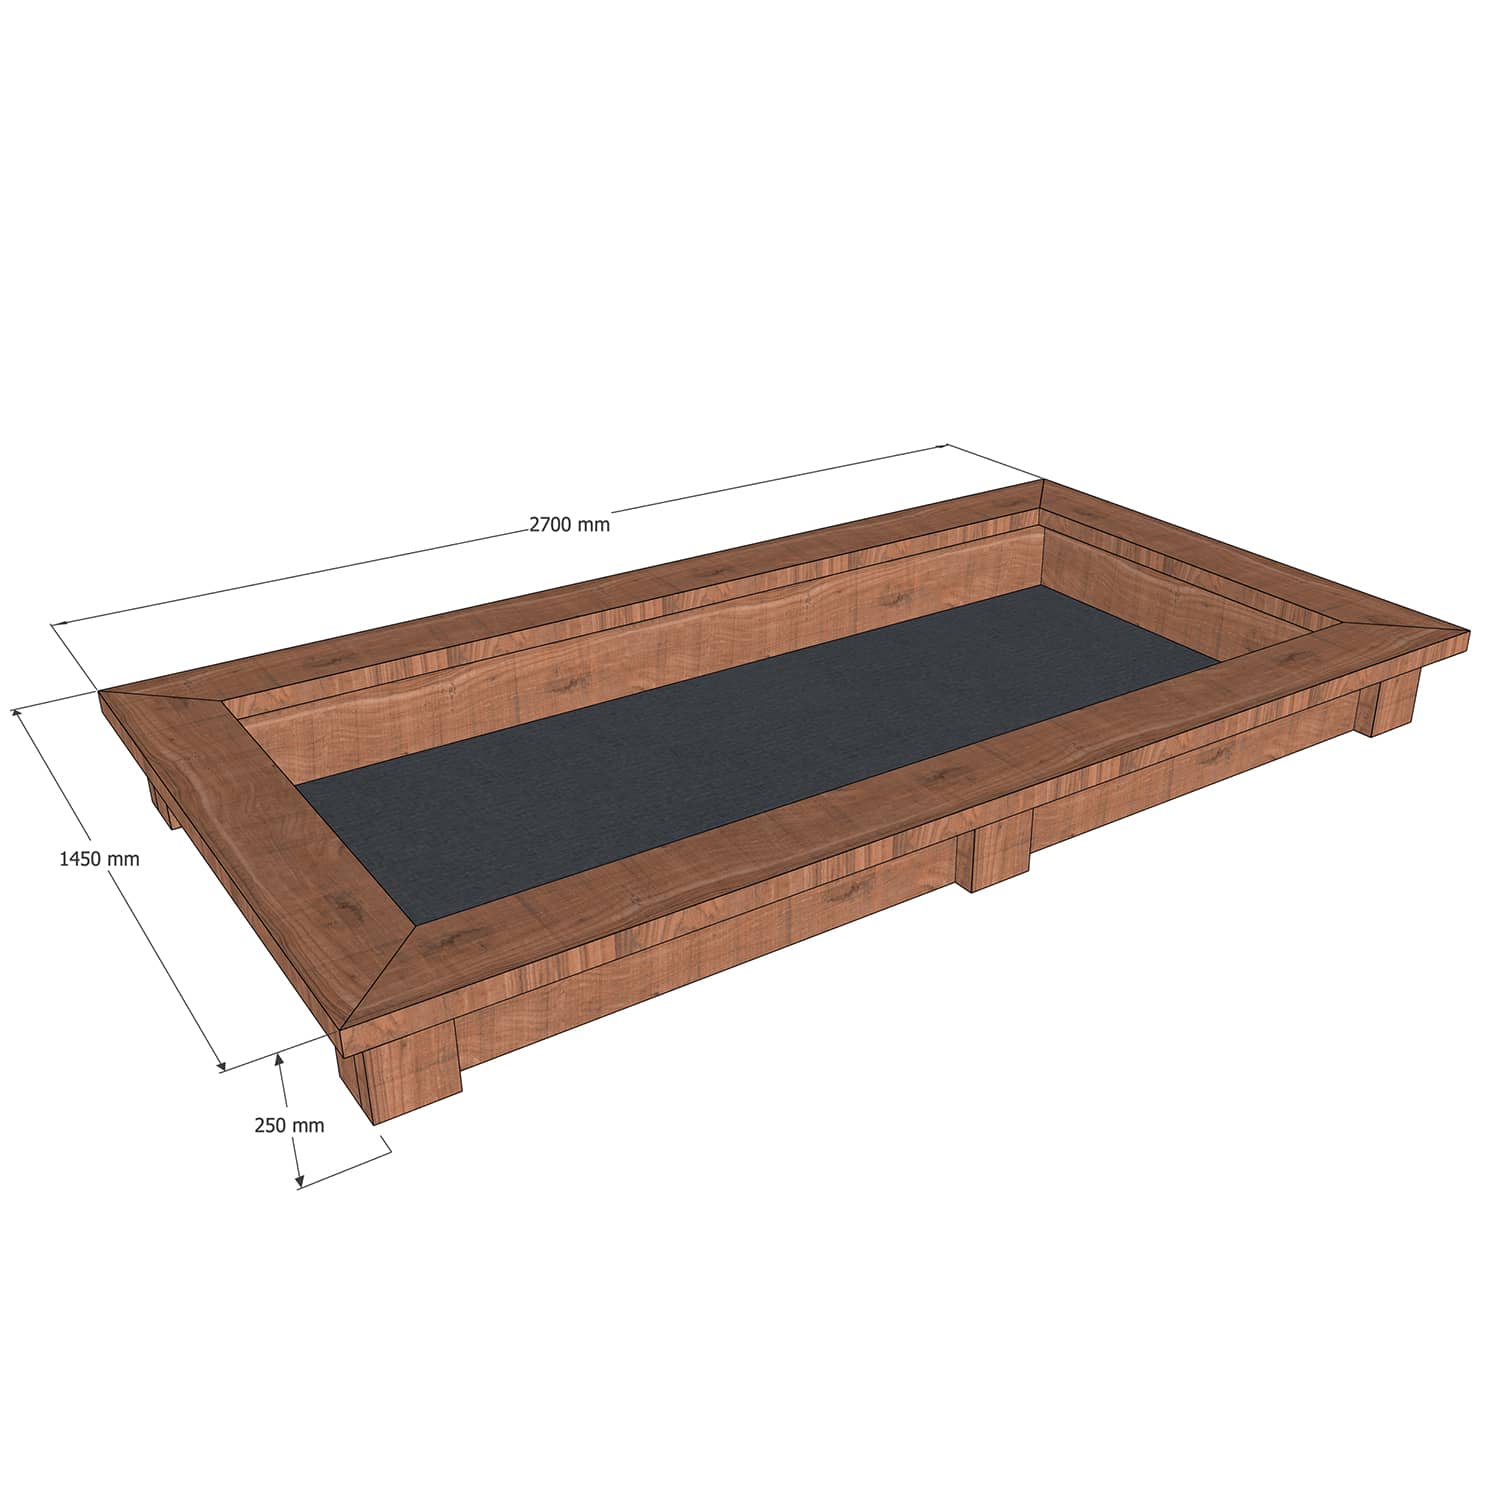 Timber Sandpit Kit with Seating edge - 1450mm x 2700mm